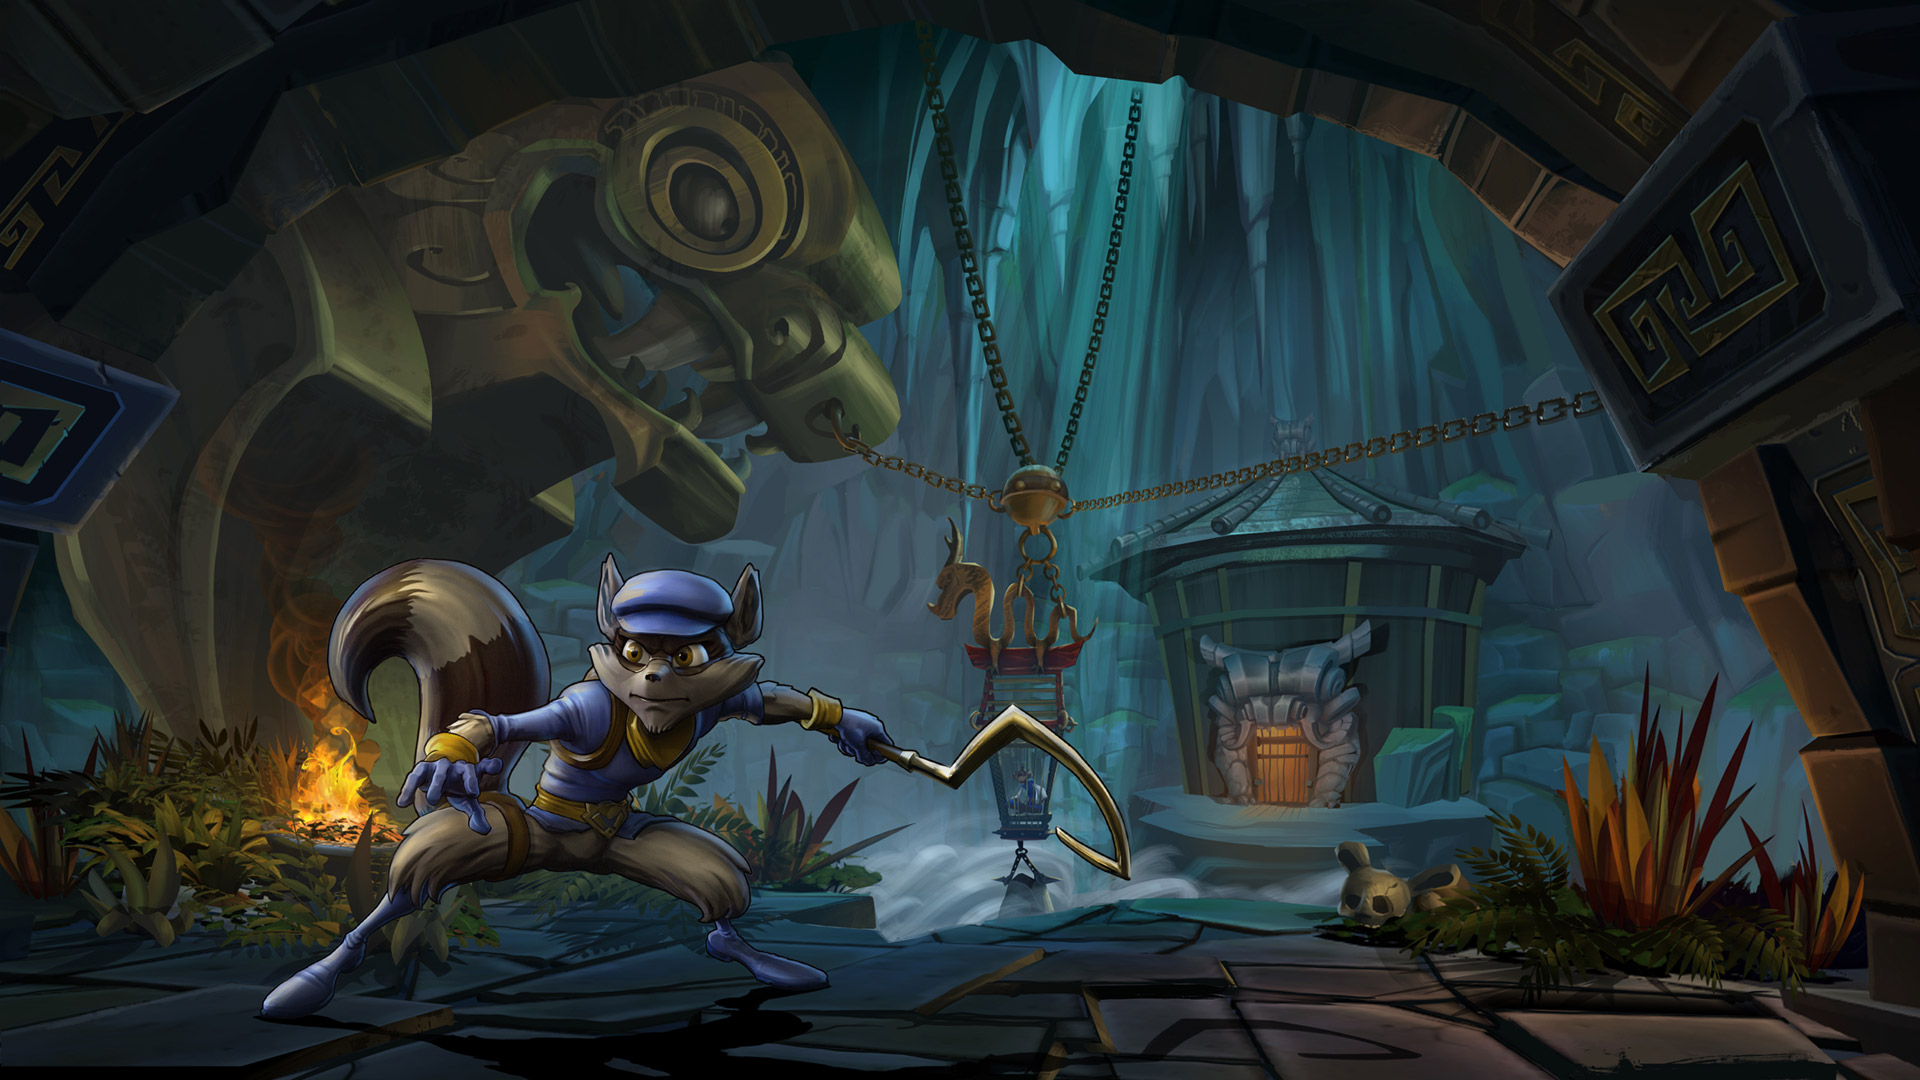 Free Sly Cooper Thieves in Time Wallpaper in 1920x1080